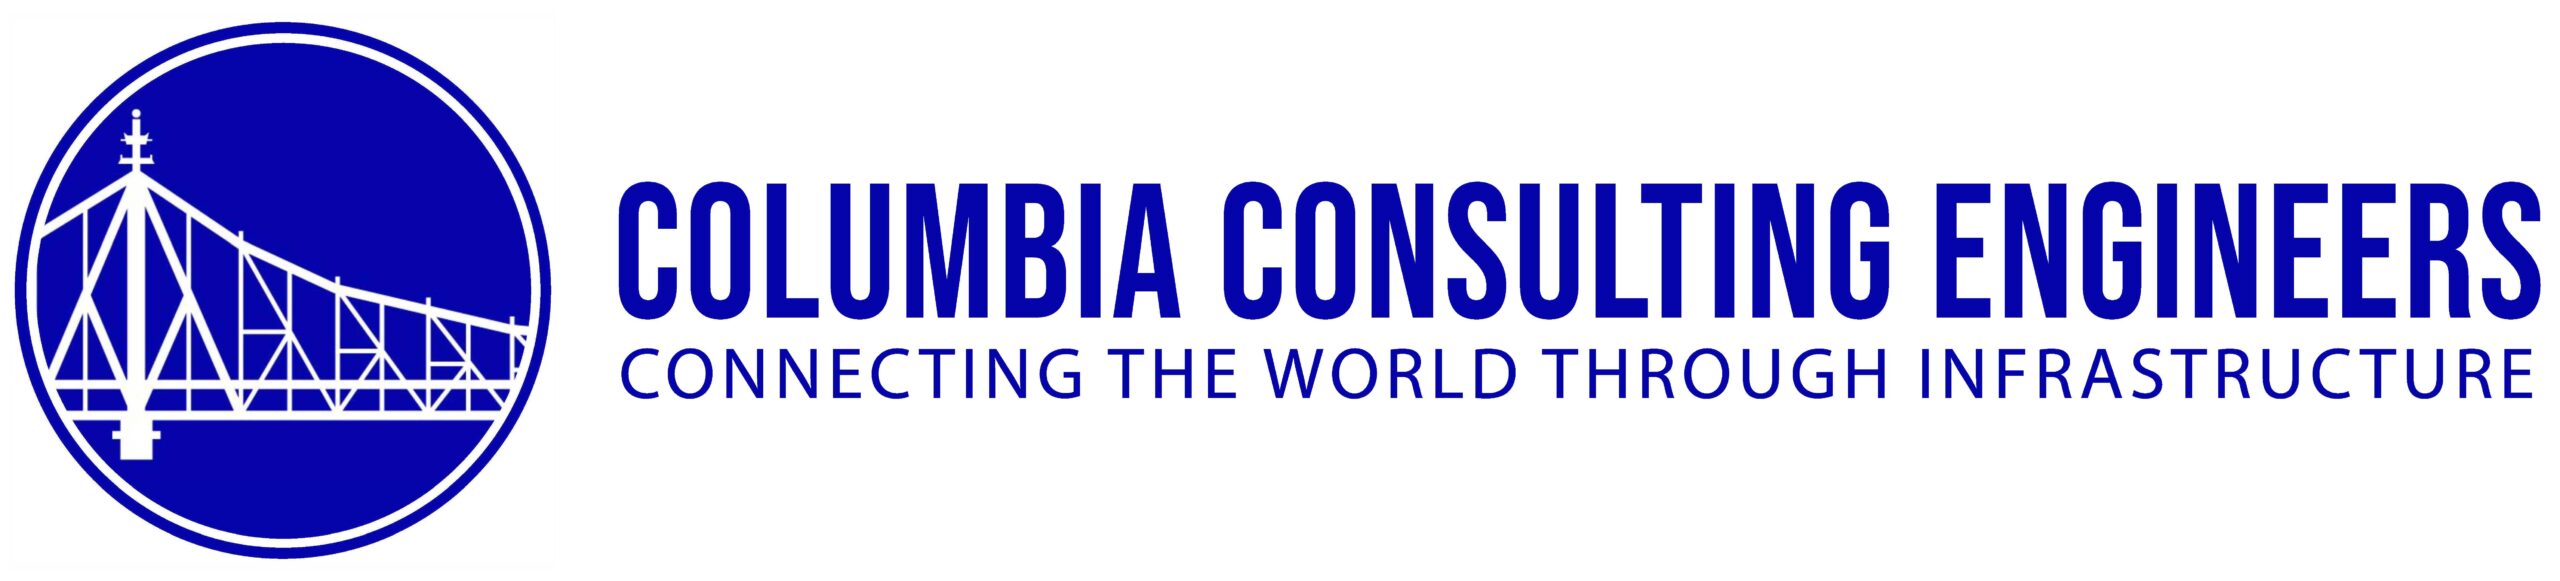 Columbia Consulting Engineers, PLLC